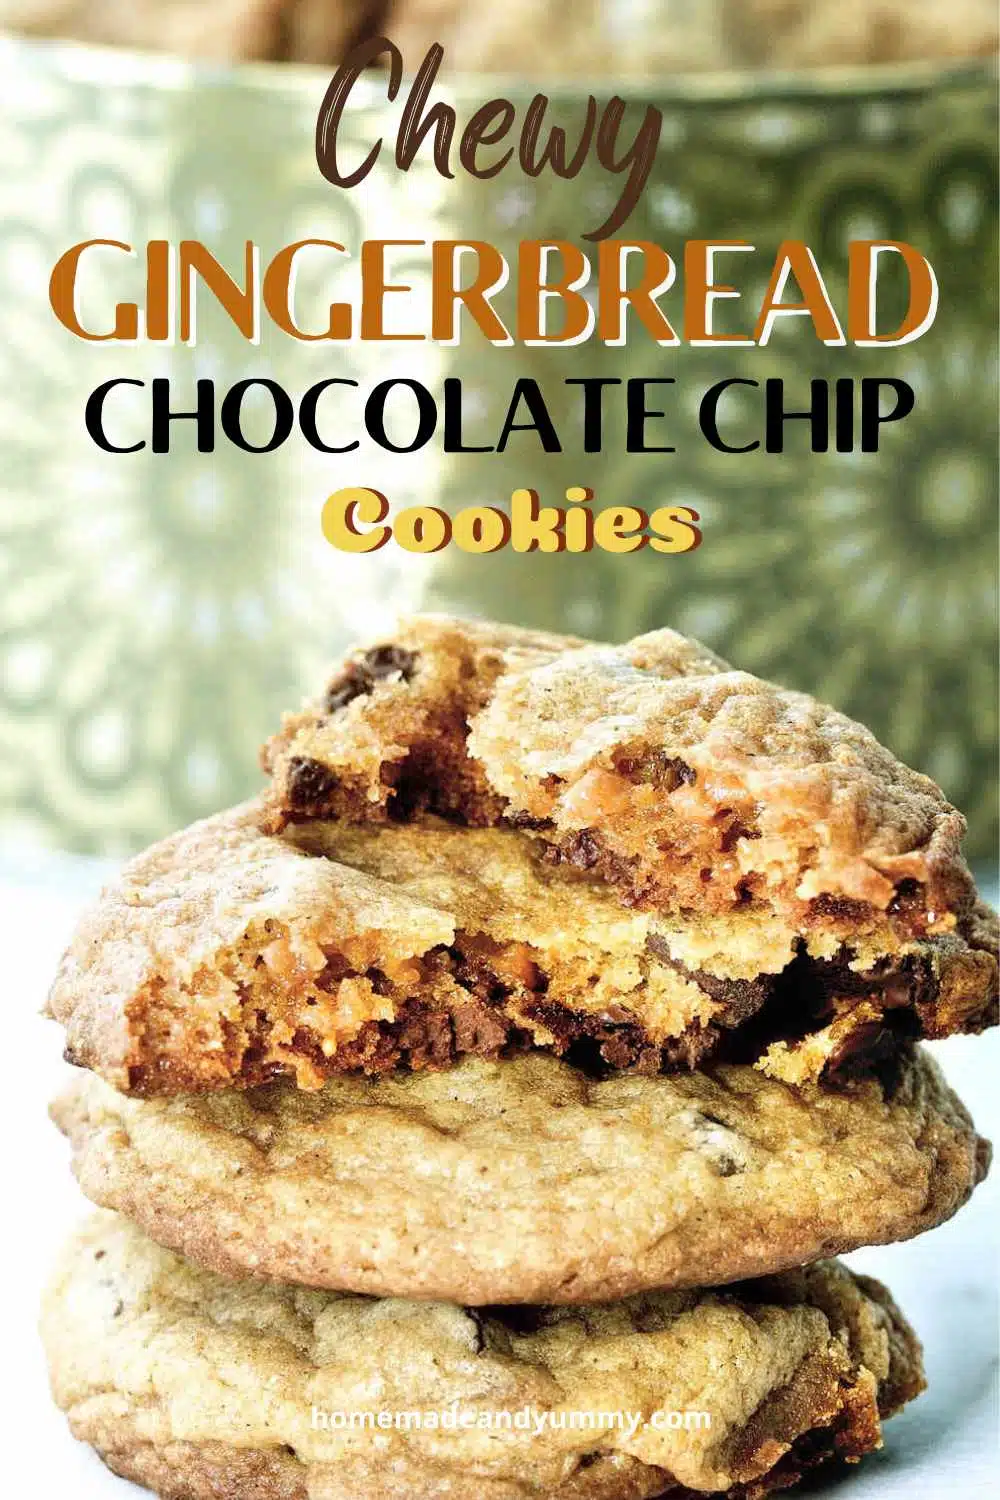 Chewy Gingerbread Chocolate Chip Cookies Pin Image